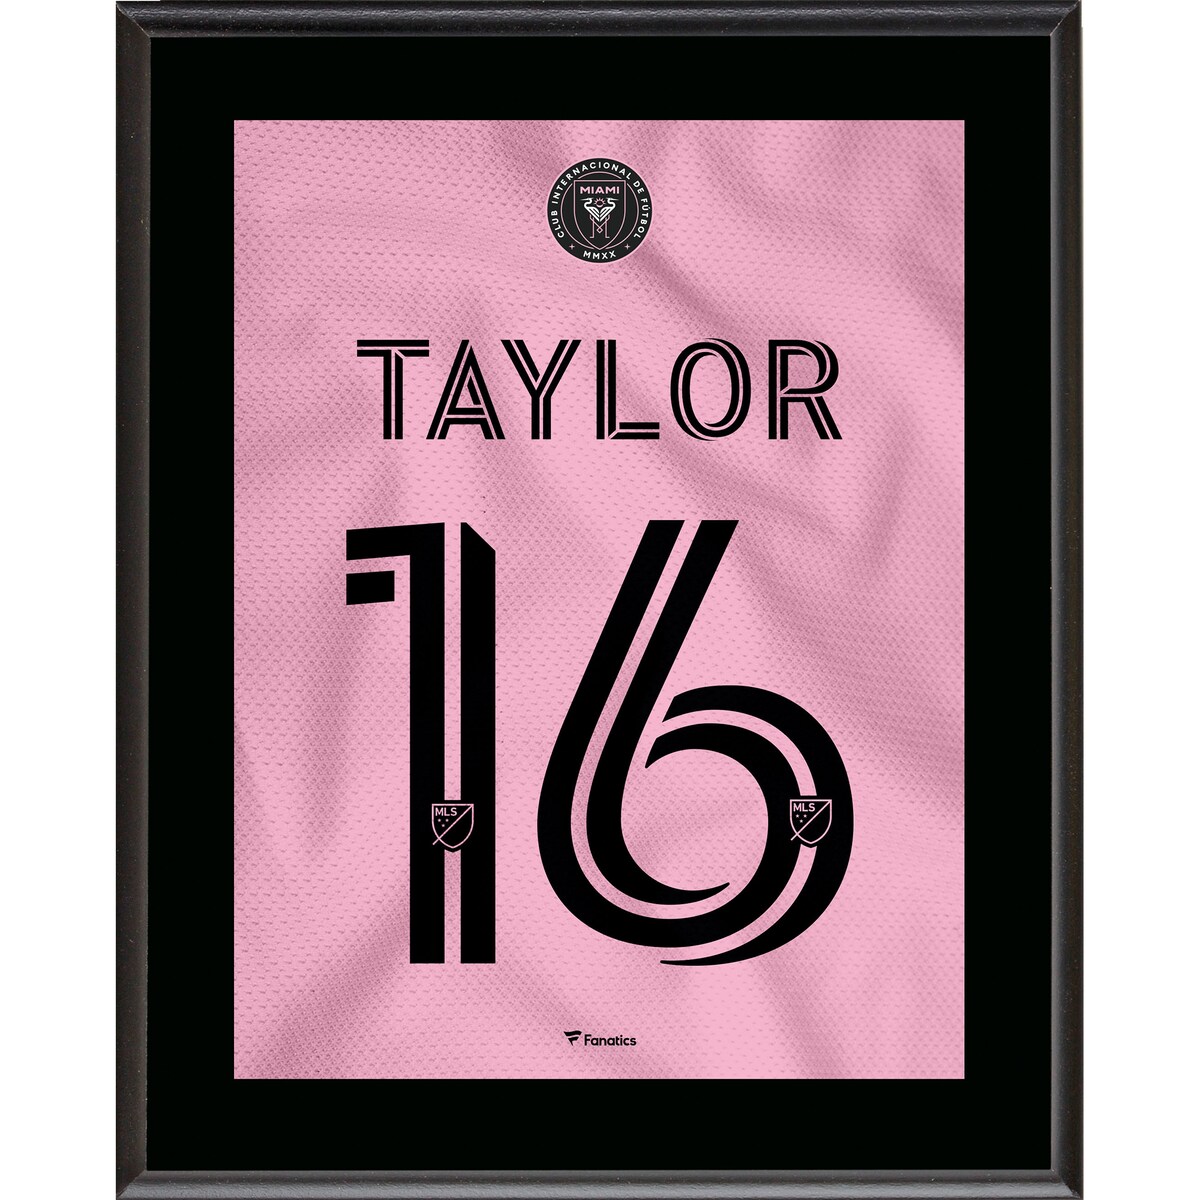 Commemorate your favorite Inter Miami CF player with this Robert Taylor 10.5" x 13" Heart Beat Jersey Style Number 16 Su...